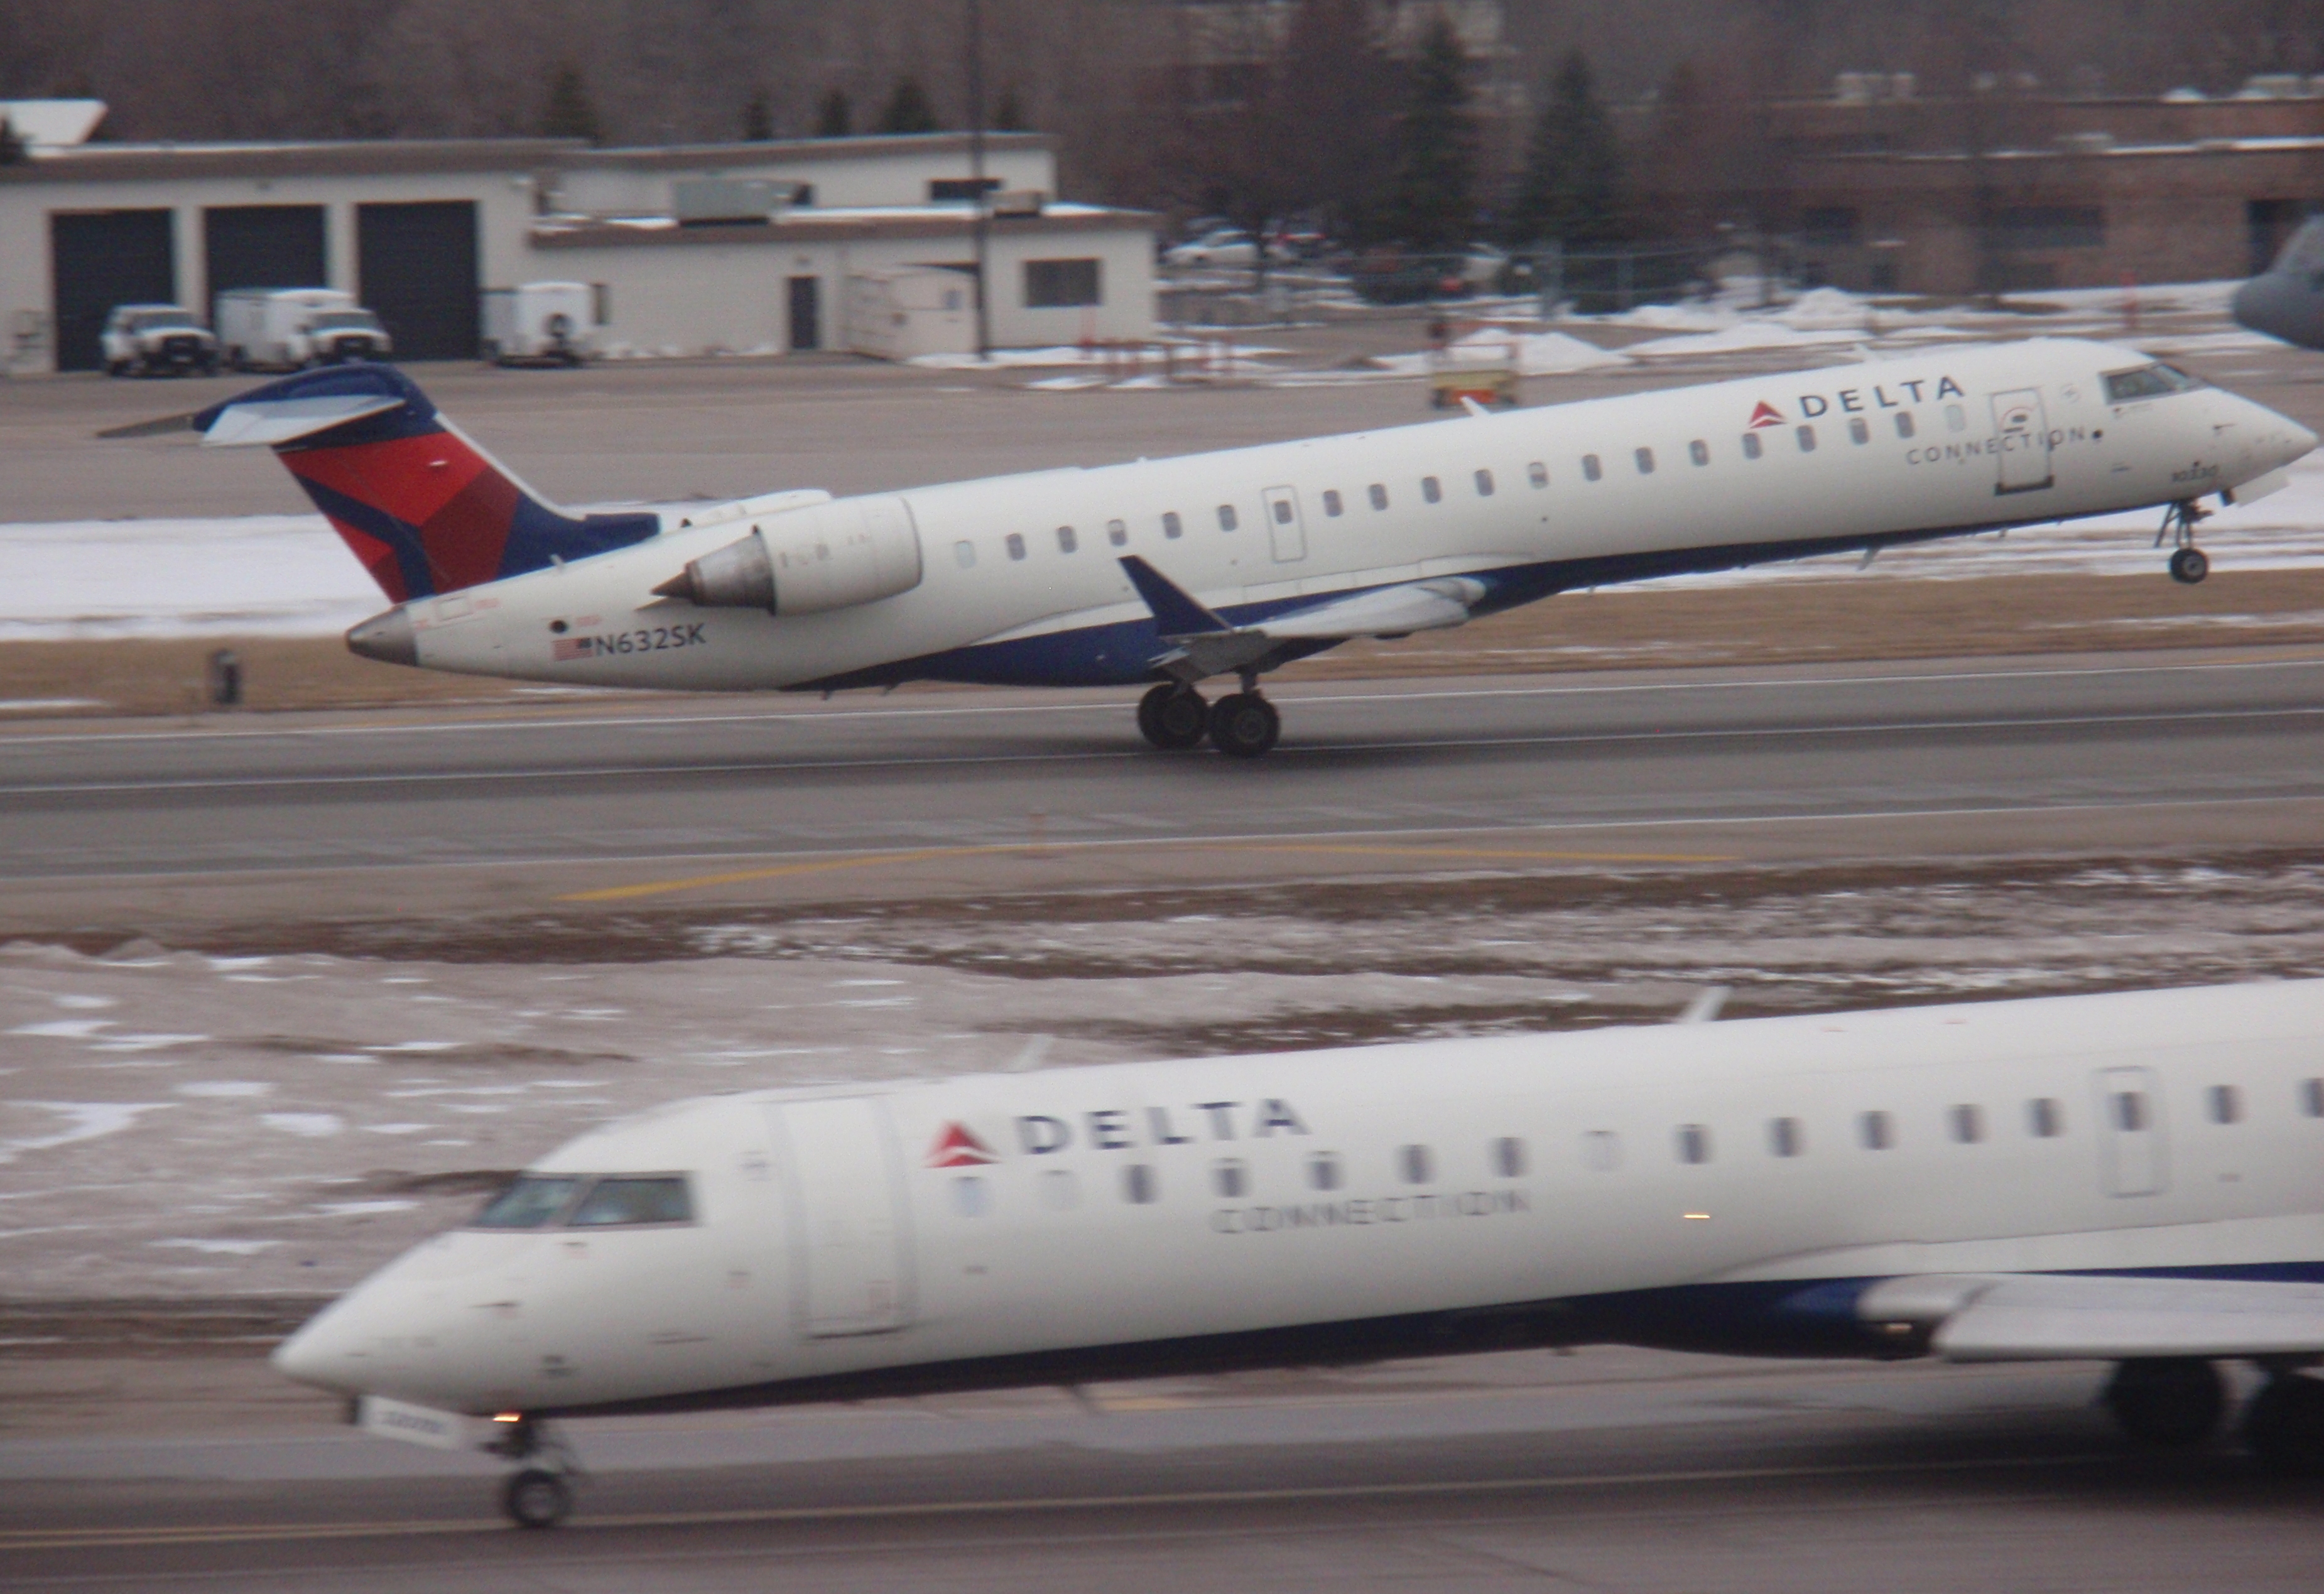 Flights at Williston are limited to planes of this size. Photo by James Ulvog at Minneapolis airport.